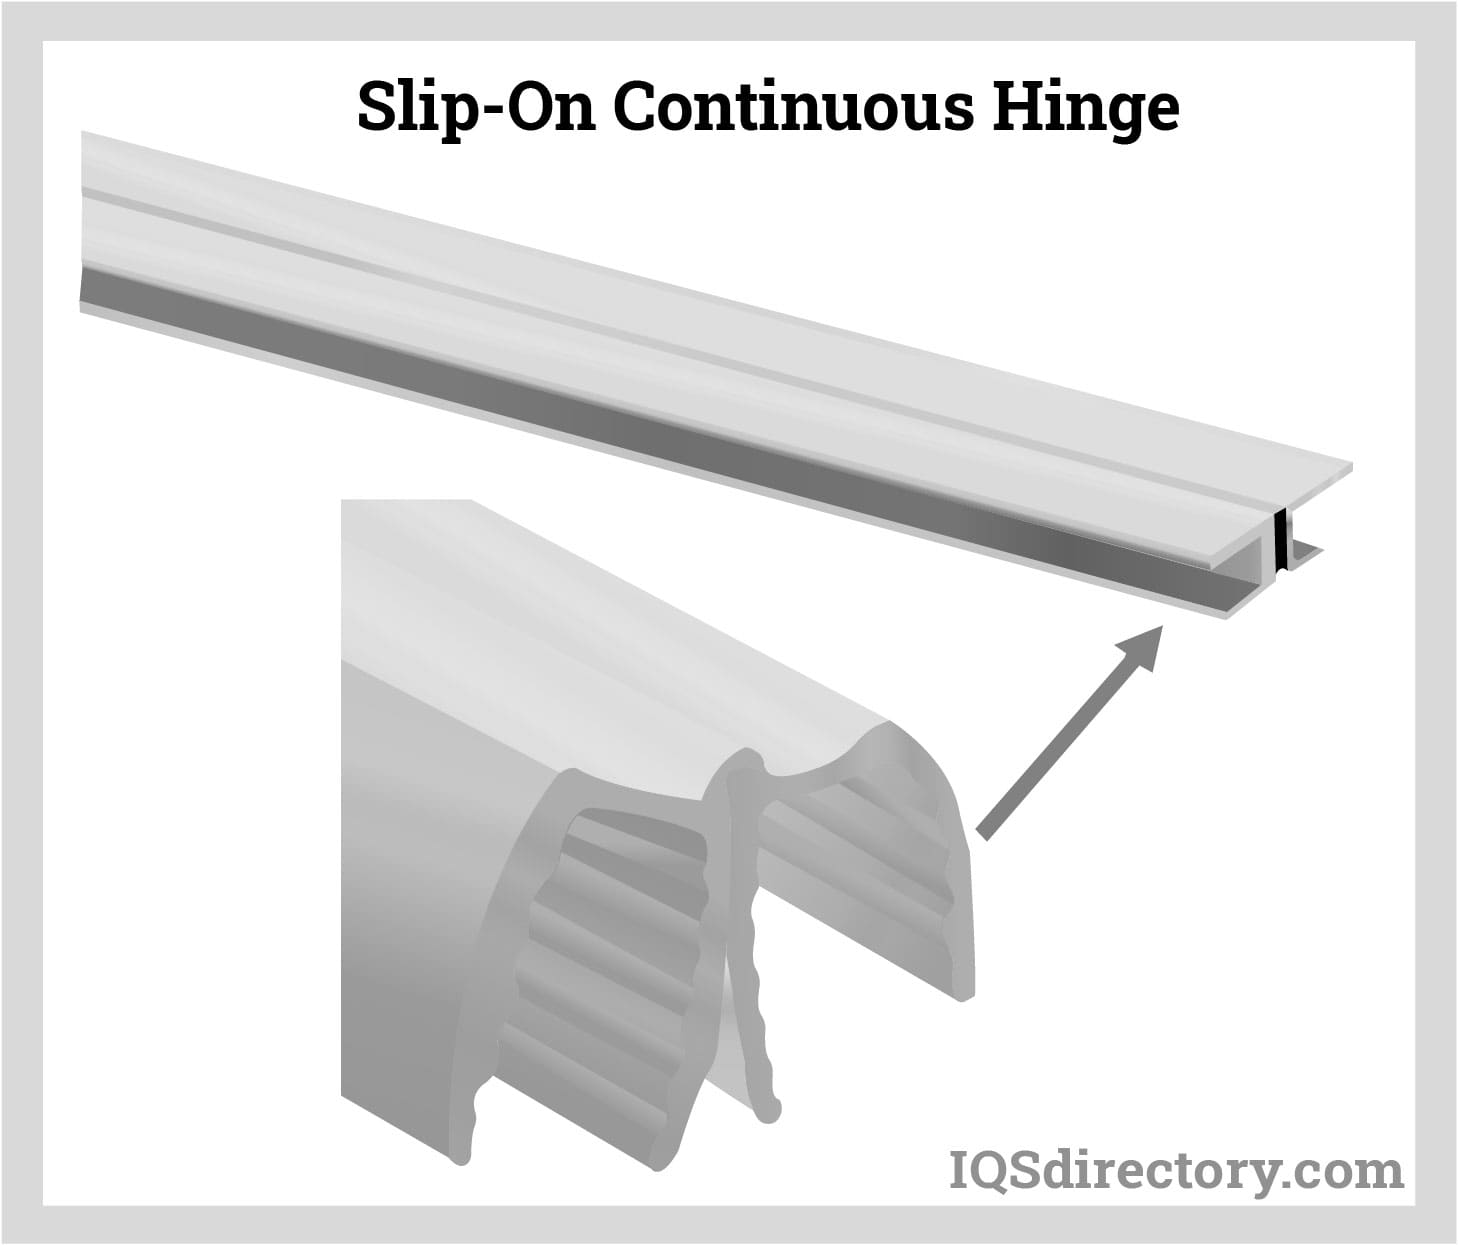 Slip-On Continuous Hinge